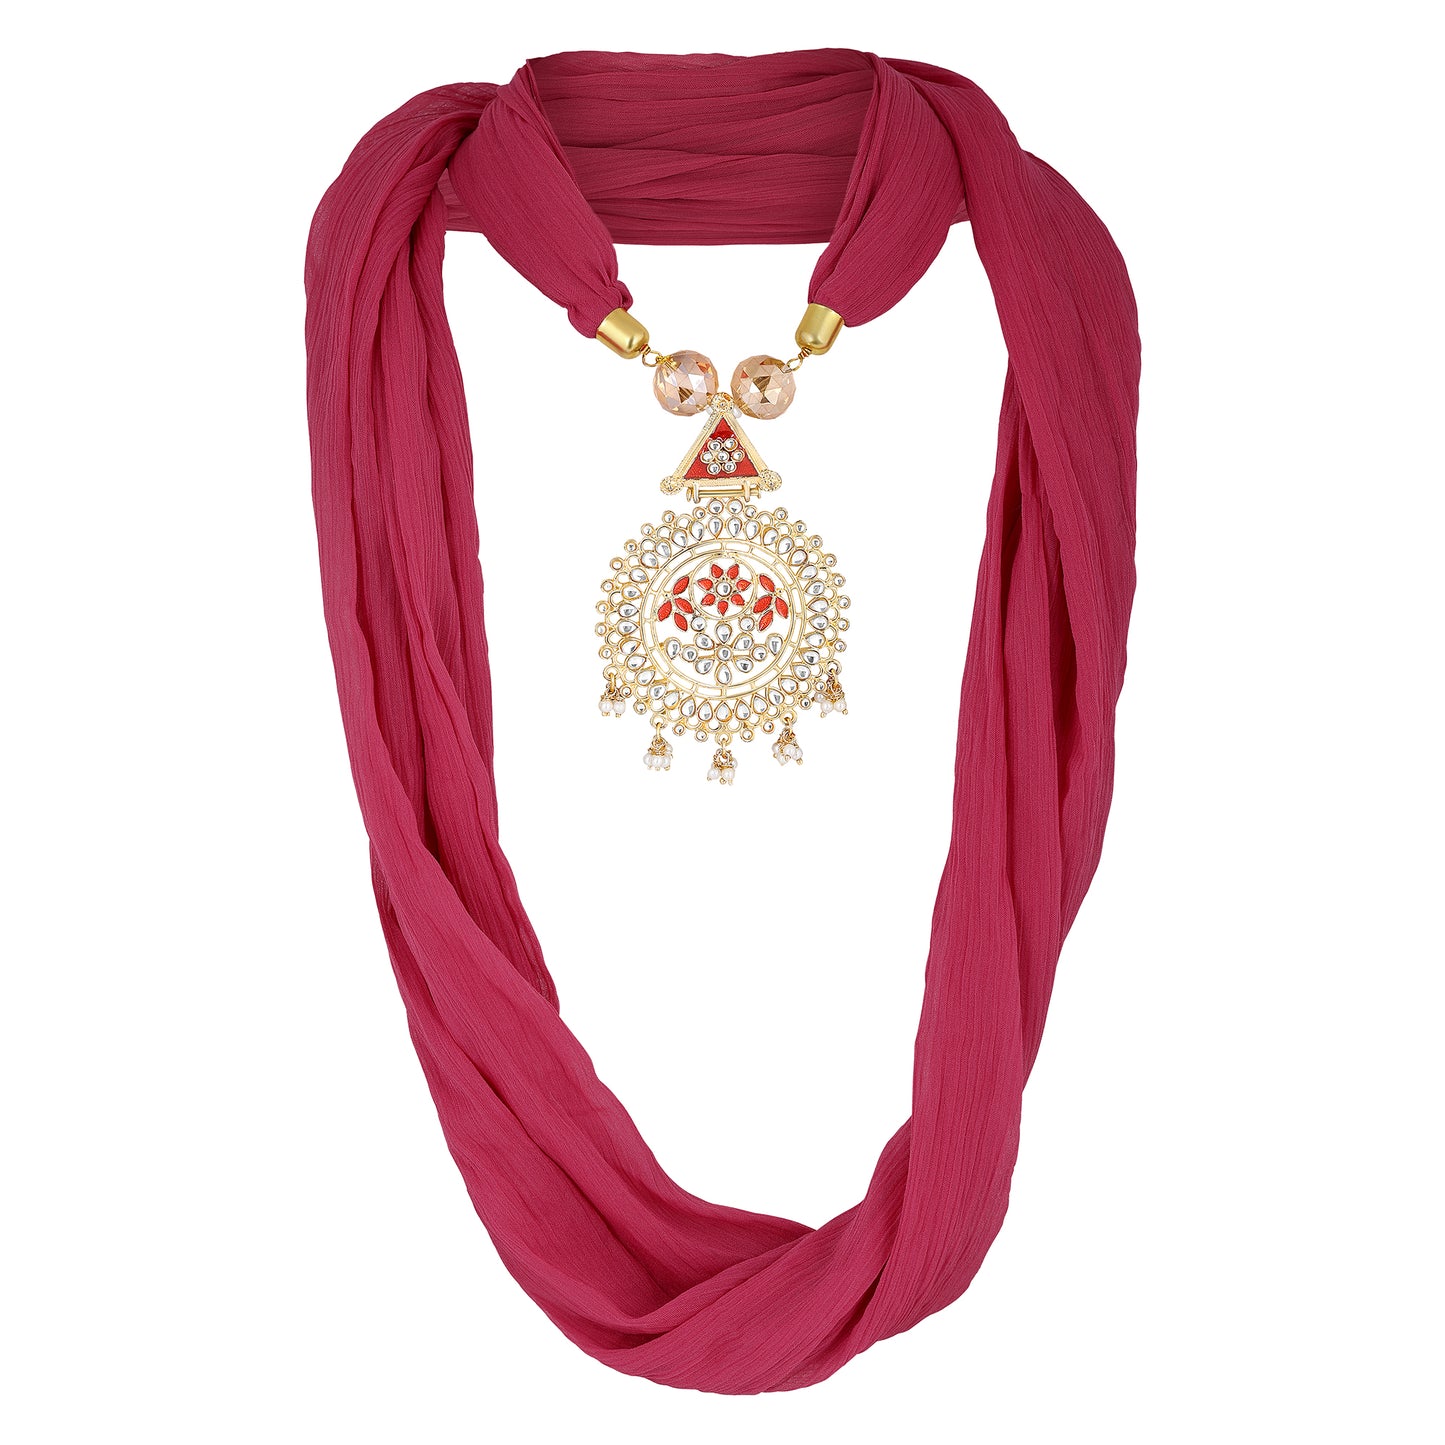 Bdiva Pink Georgette Scarf With Indian Jewelry And Motif